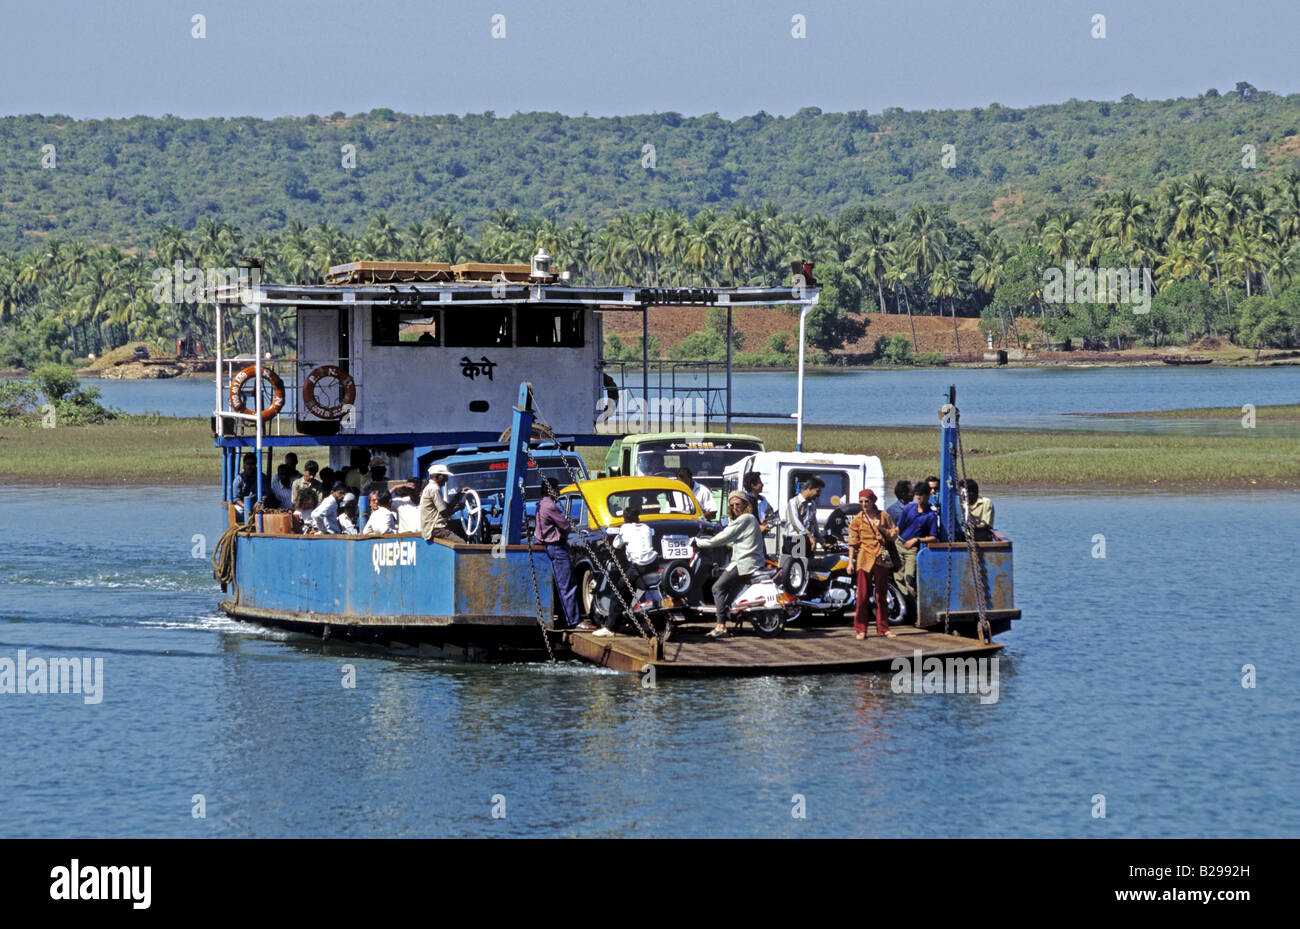 Ferry R Chapora Goa State India Date 15 06 2008 Ref ZB548 115573 0088 COMPULSORY CREDIT World Pictures Photoshot Stock Photo